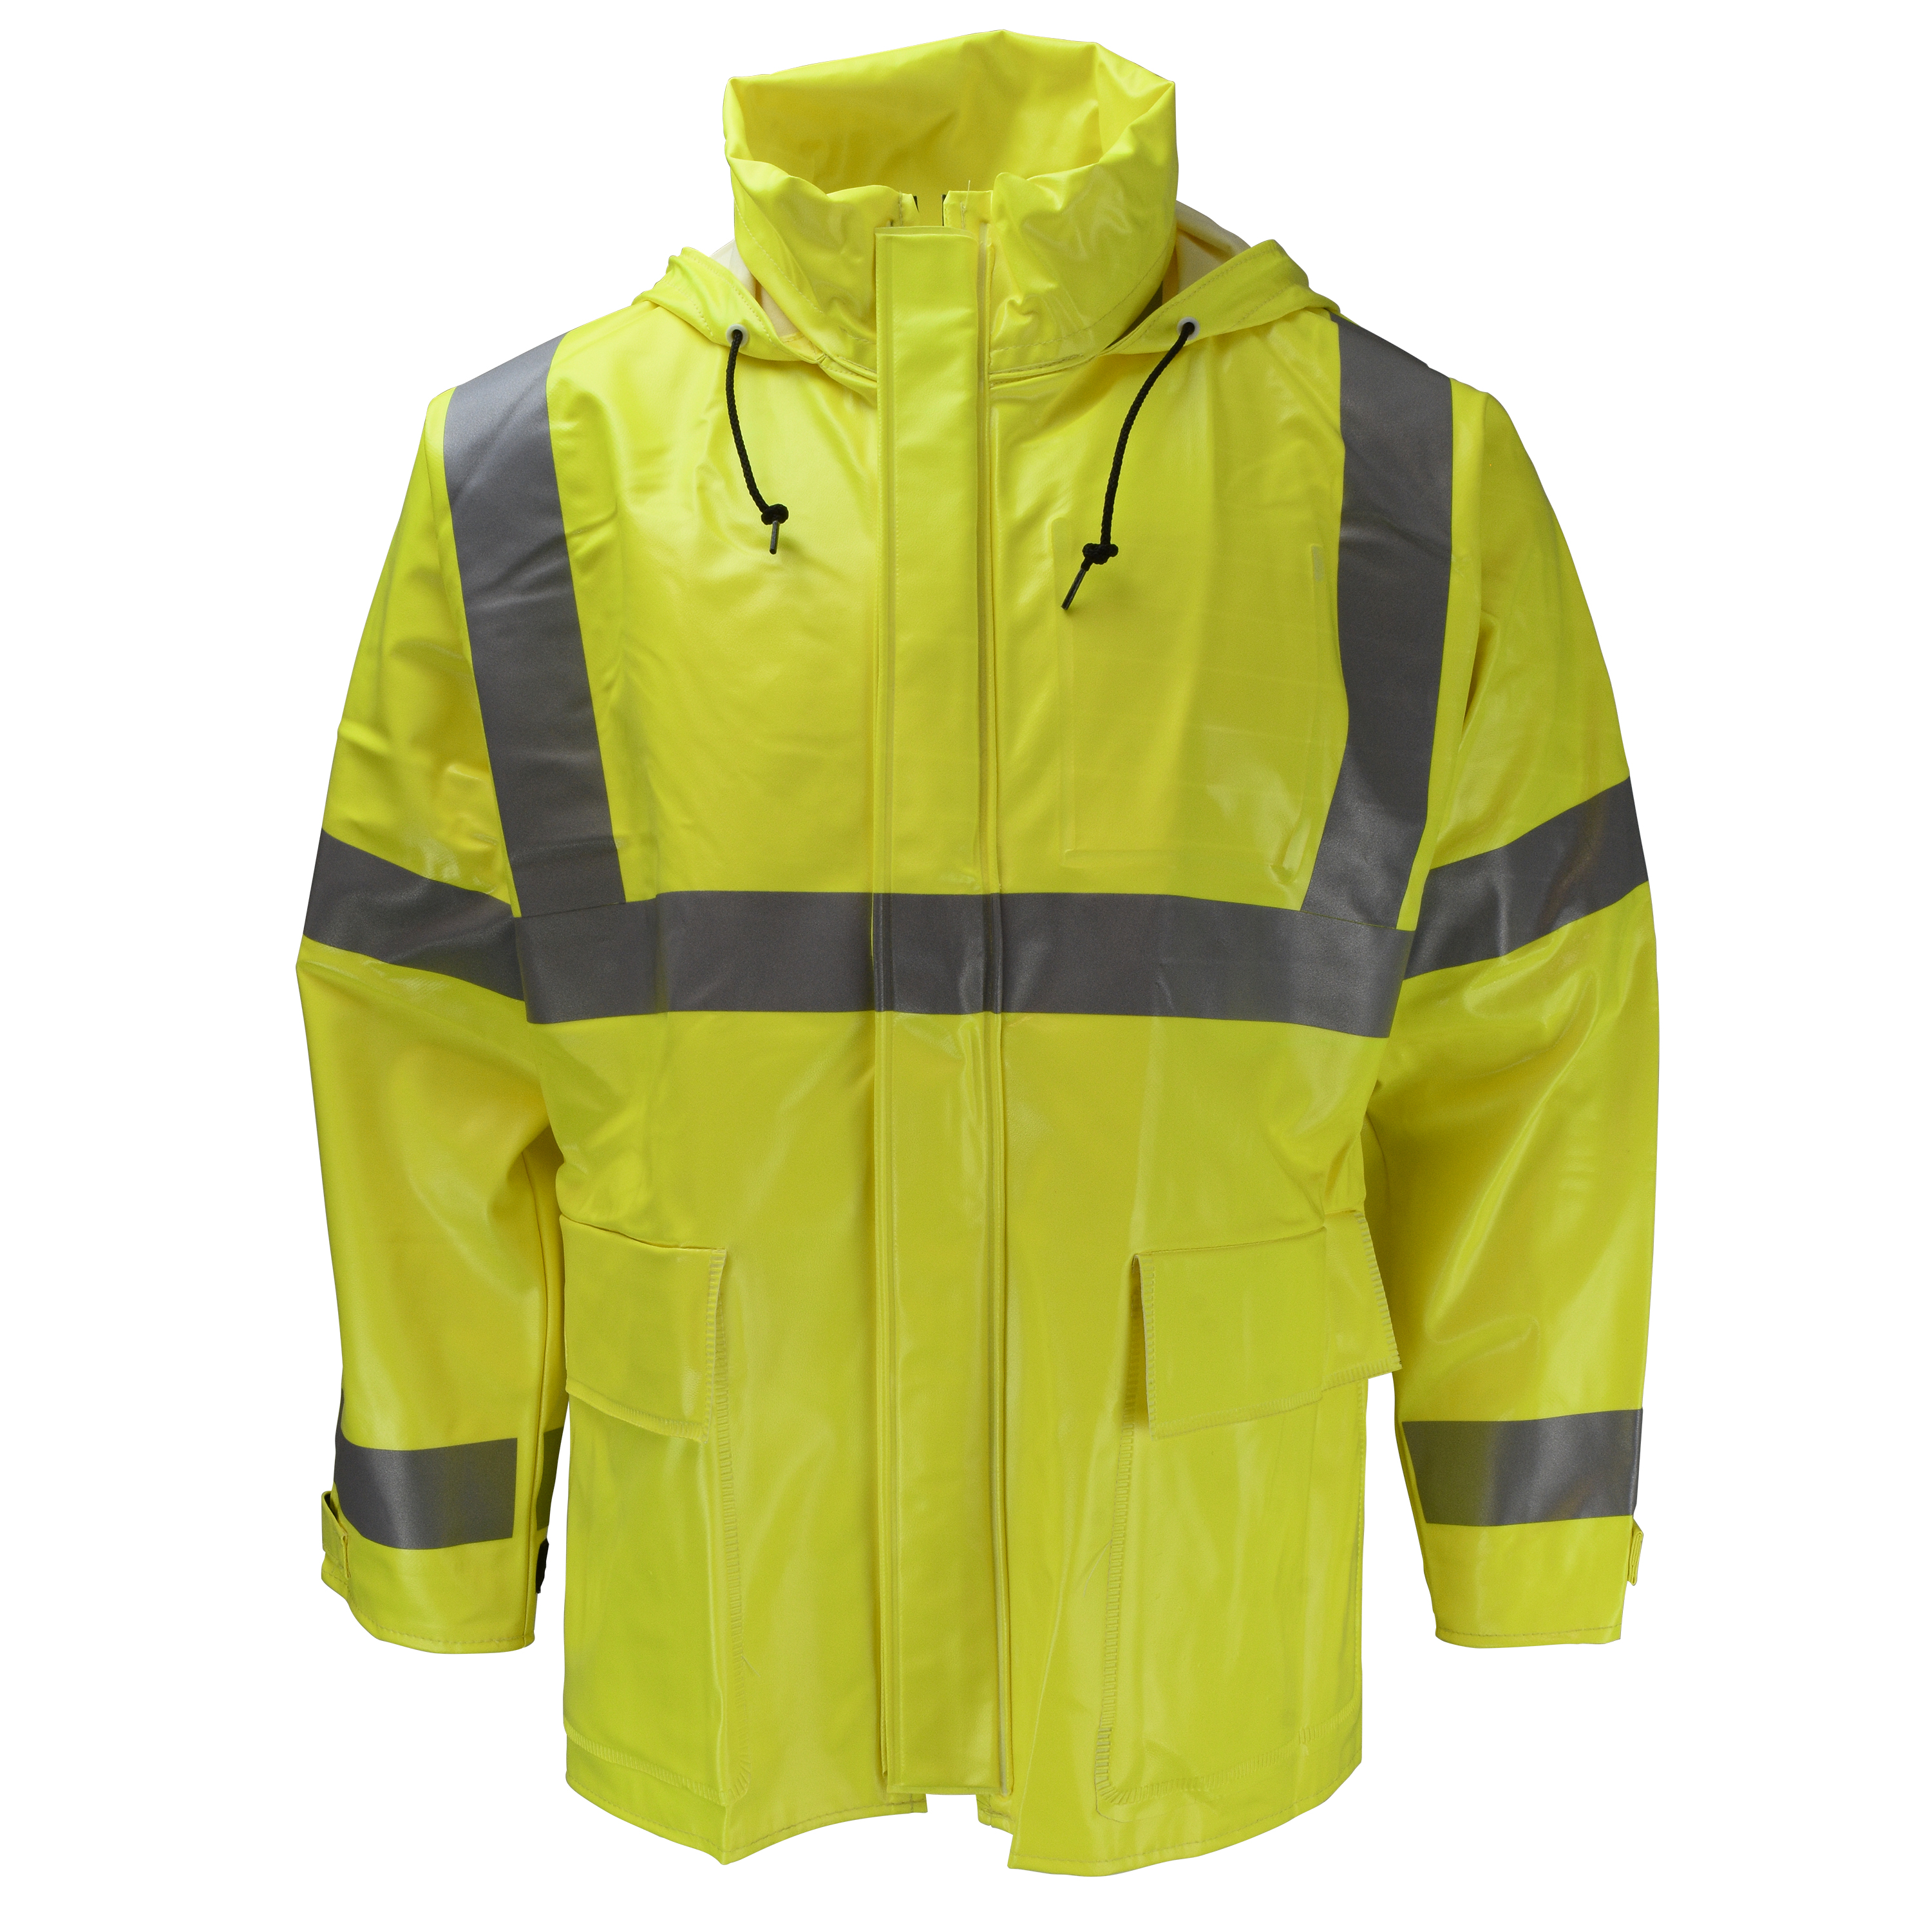 Dura Arc II Jacket with Attached Hood - Hi-Vis Lime - Size L